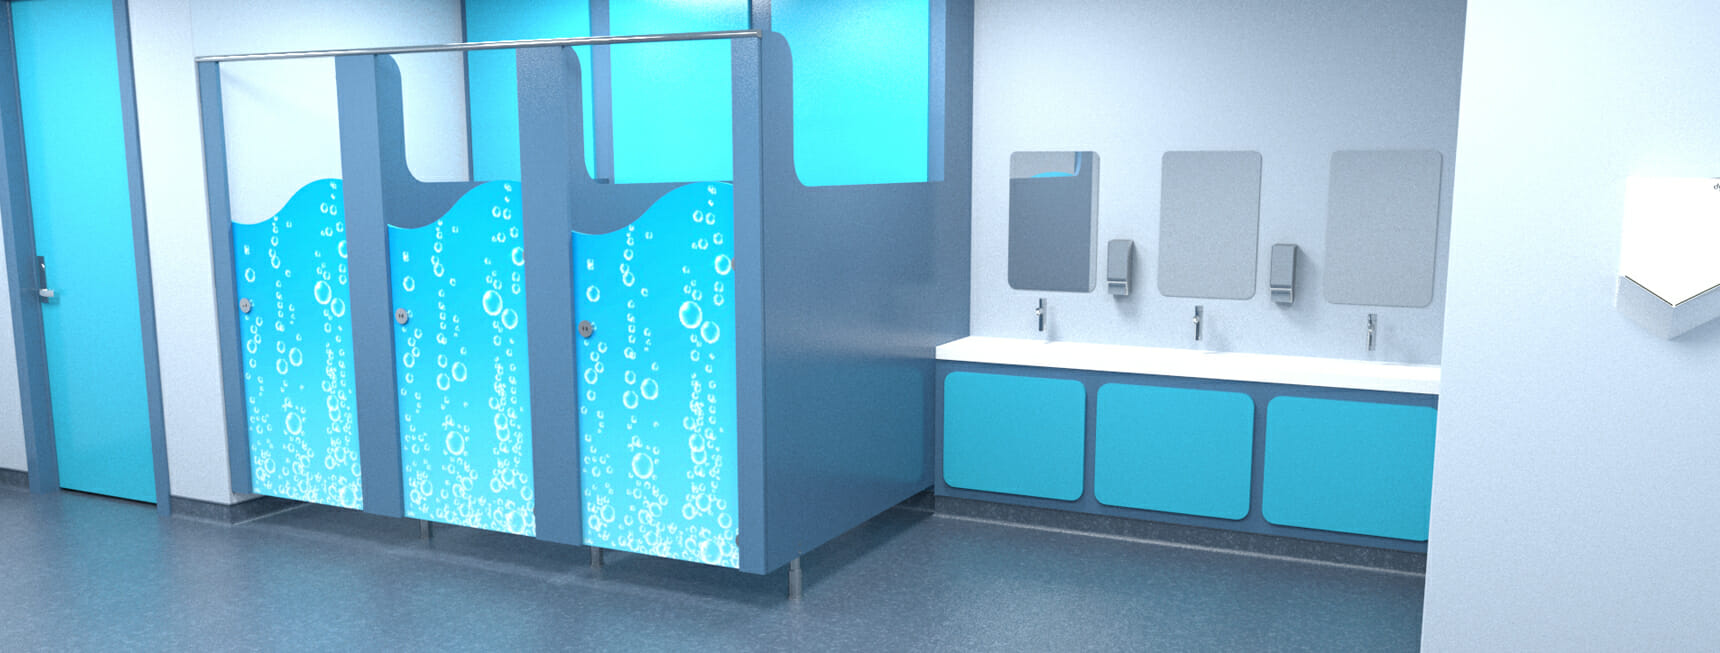 Manufacturers of Soul Cubicle Systems for Primary School Washrooms